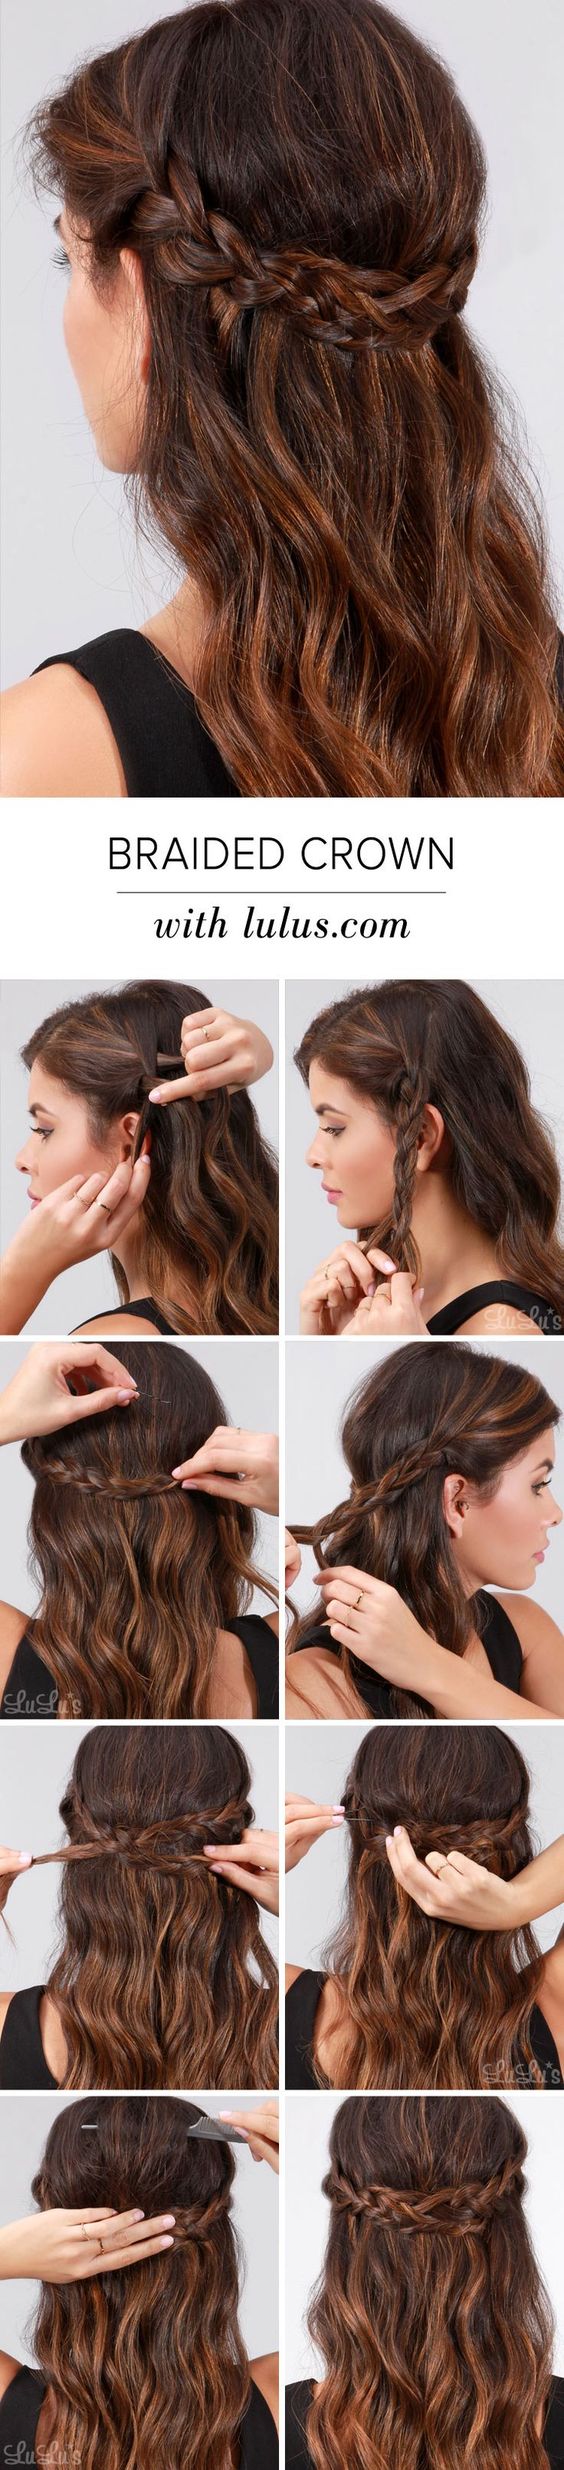 25 Pretty Bobby Pin Hairstyles | Stay At Home Mum